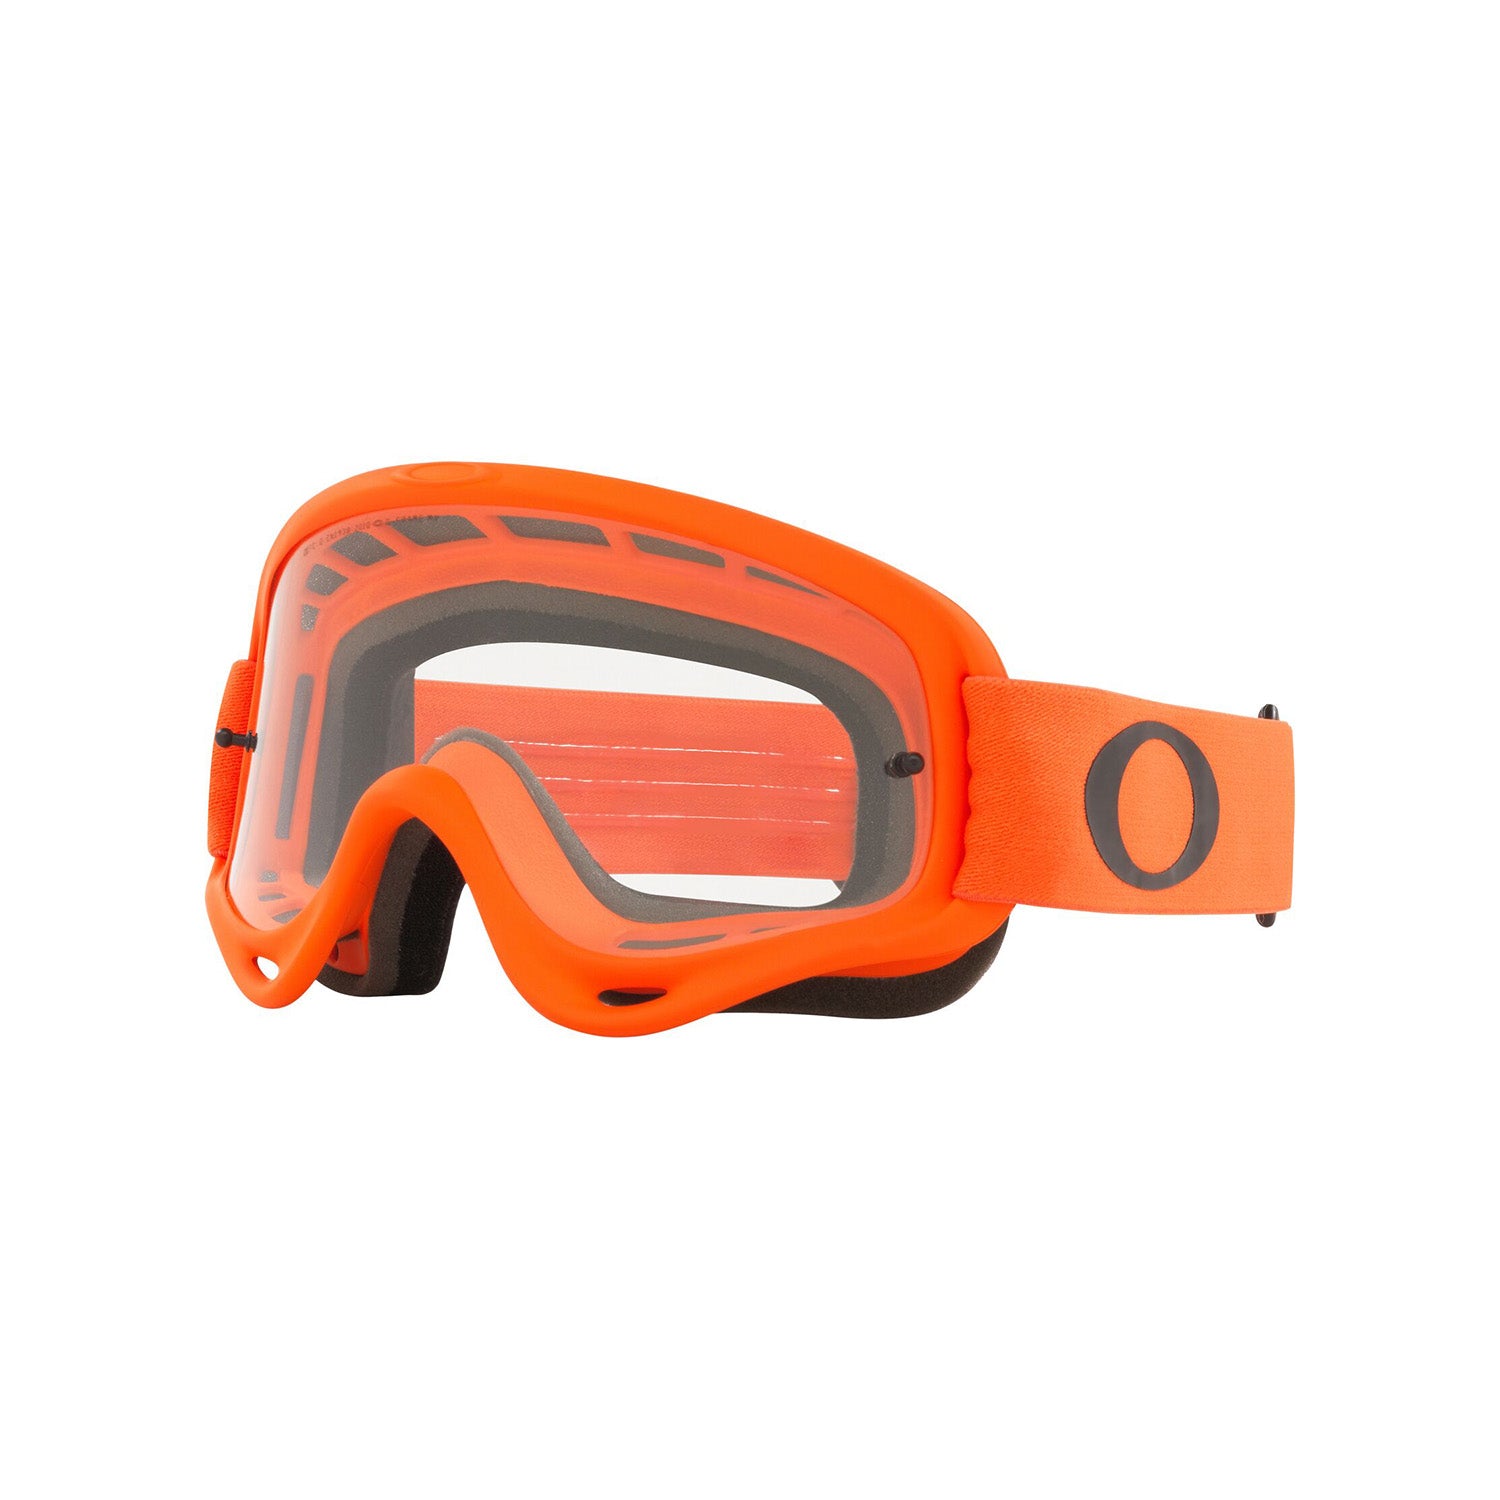 Oakley O Frame MX Goggle in Moto Orange with Clear Lens